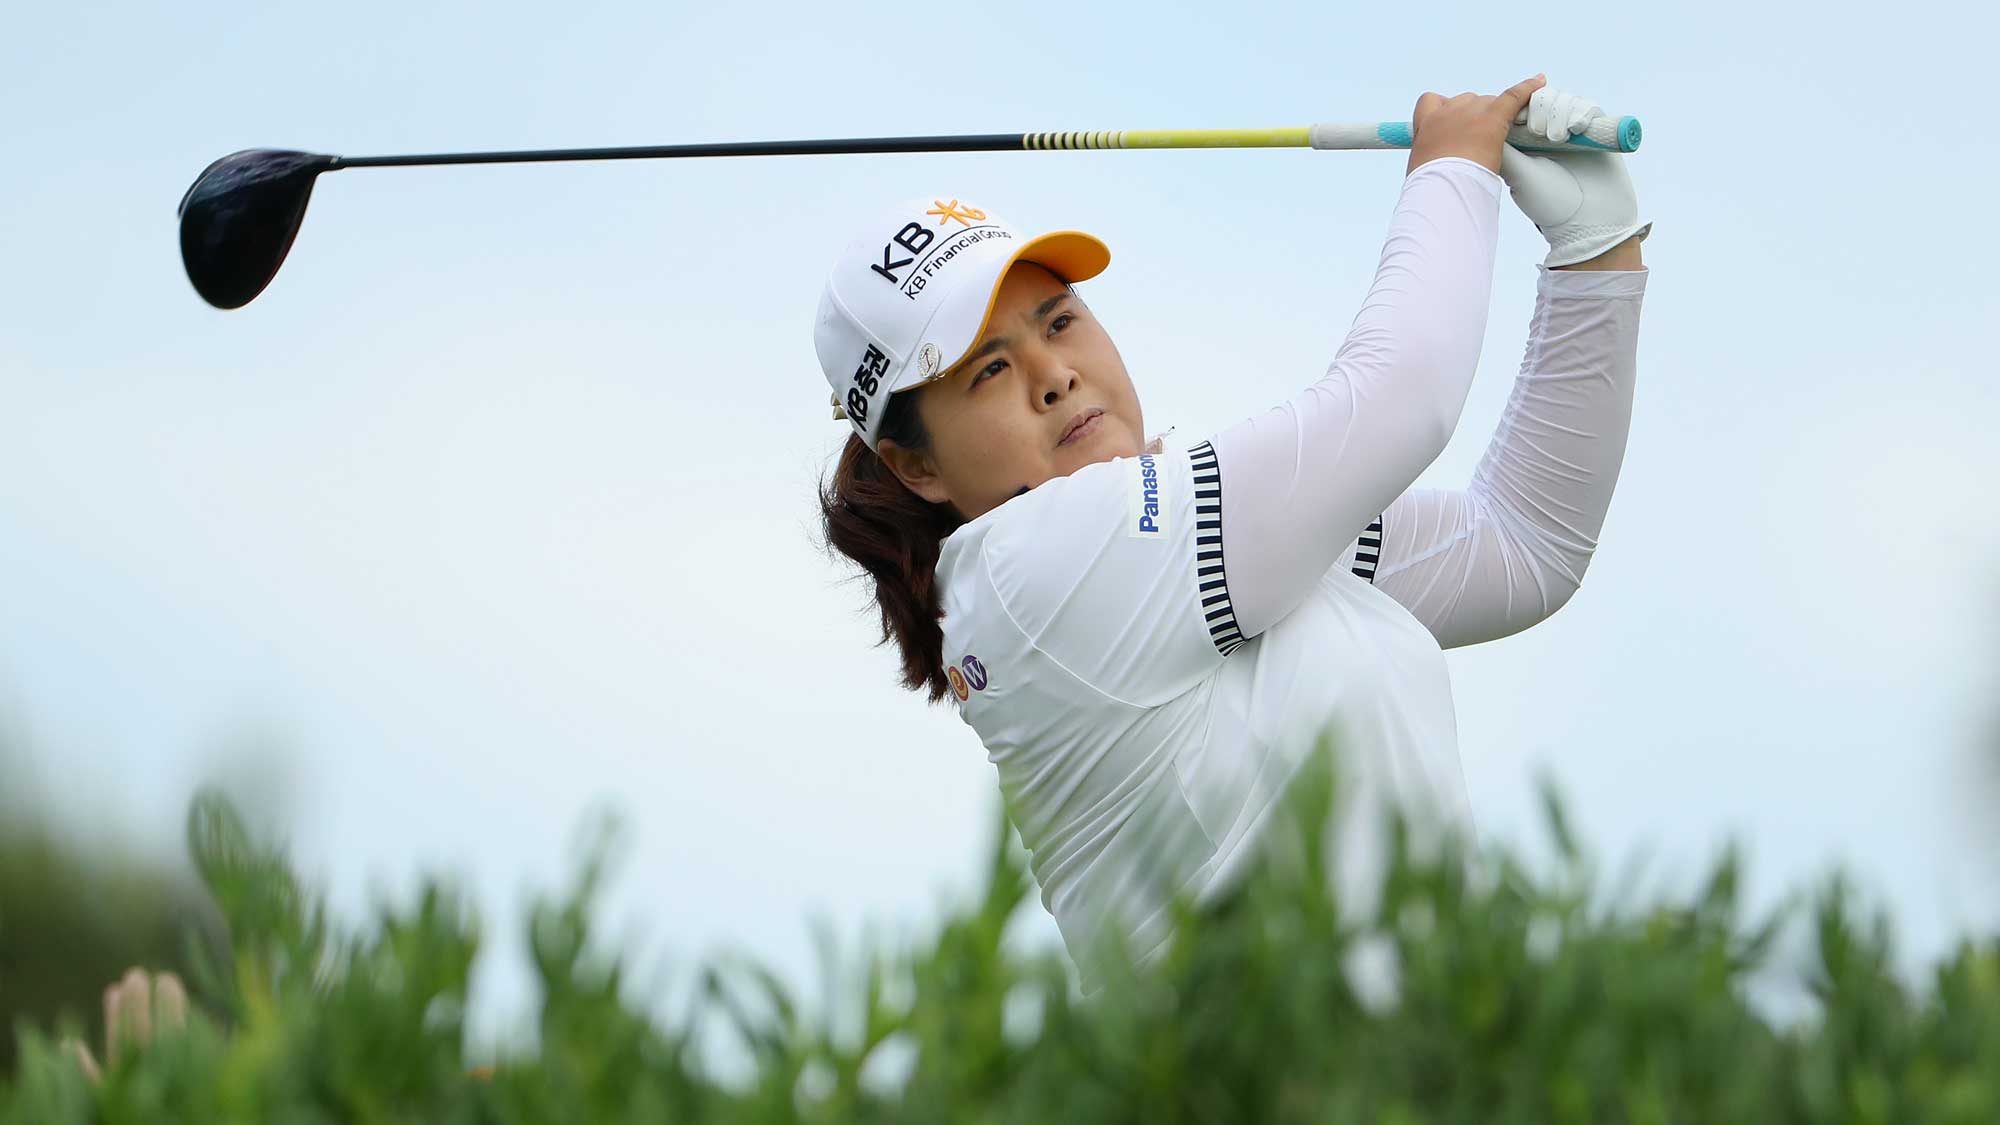 Inbee Park of the Republic of Korea plays a tee shot on the 13th hole during the second round of the LPGA LOTTE Championship Presented By Hershey